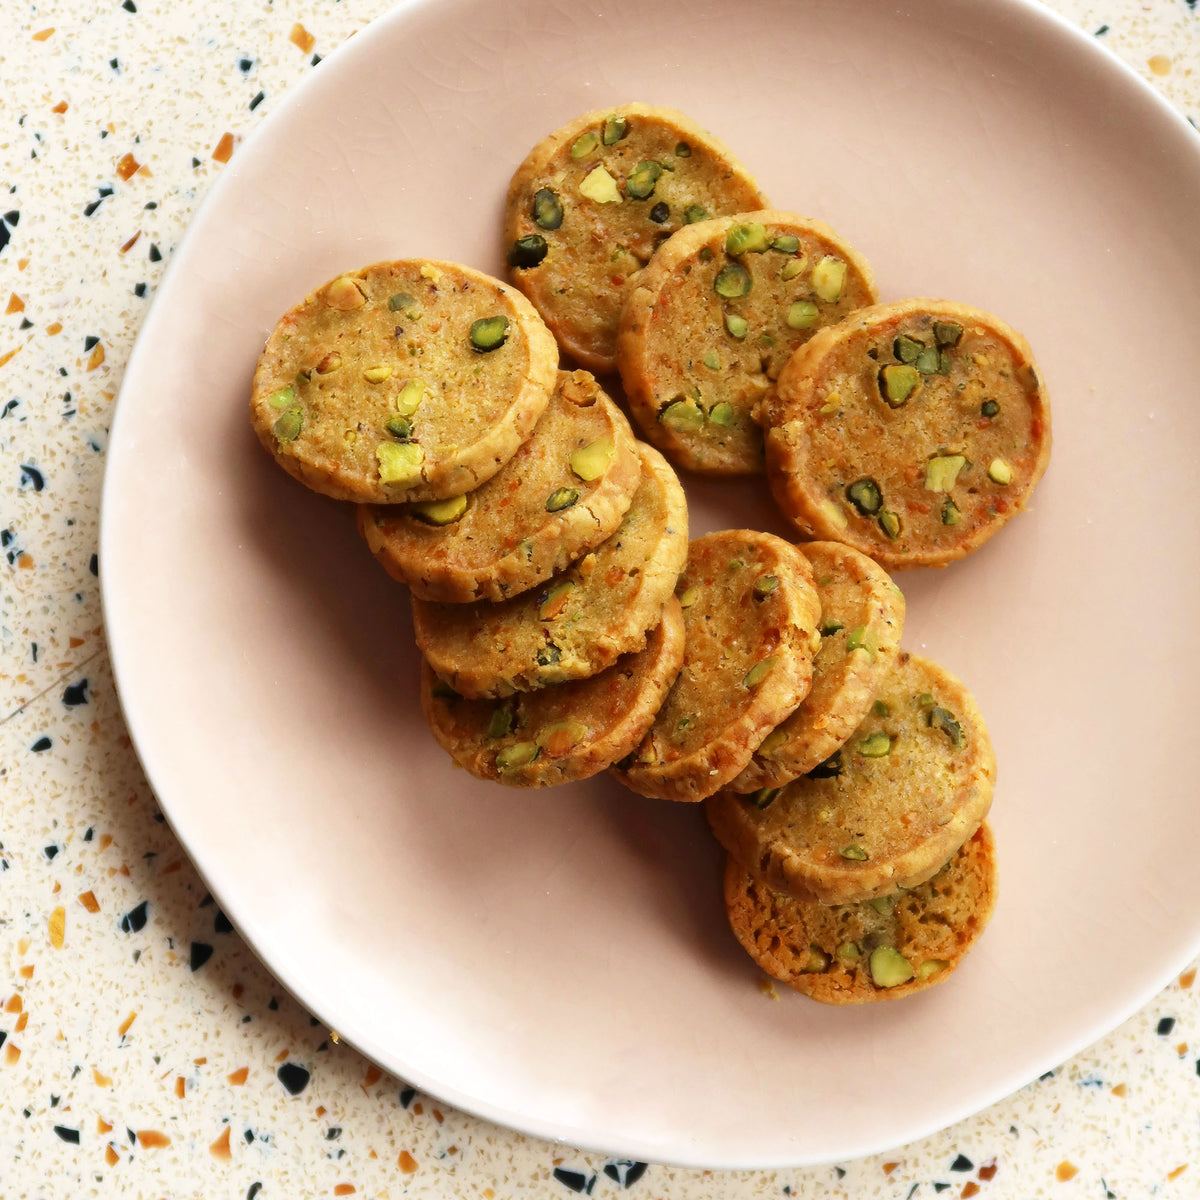 Cheddar and Pistachio Biscuits